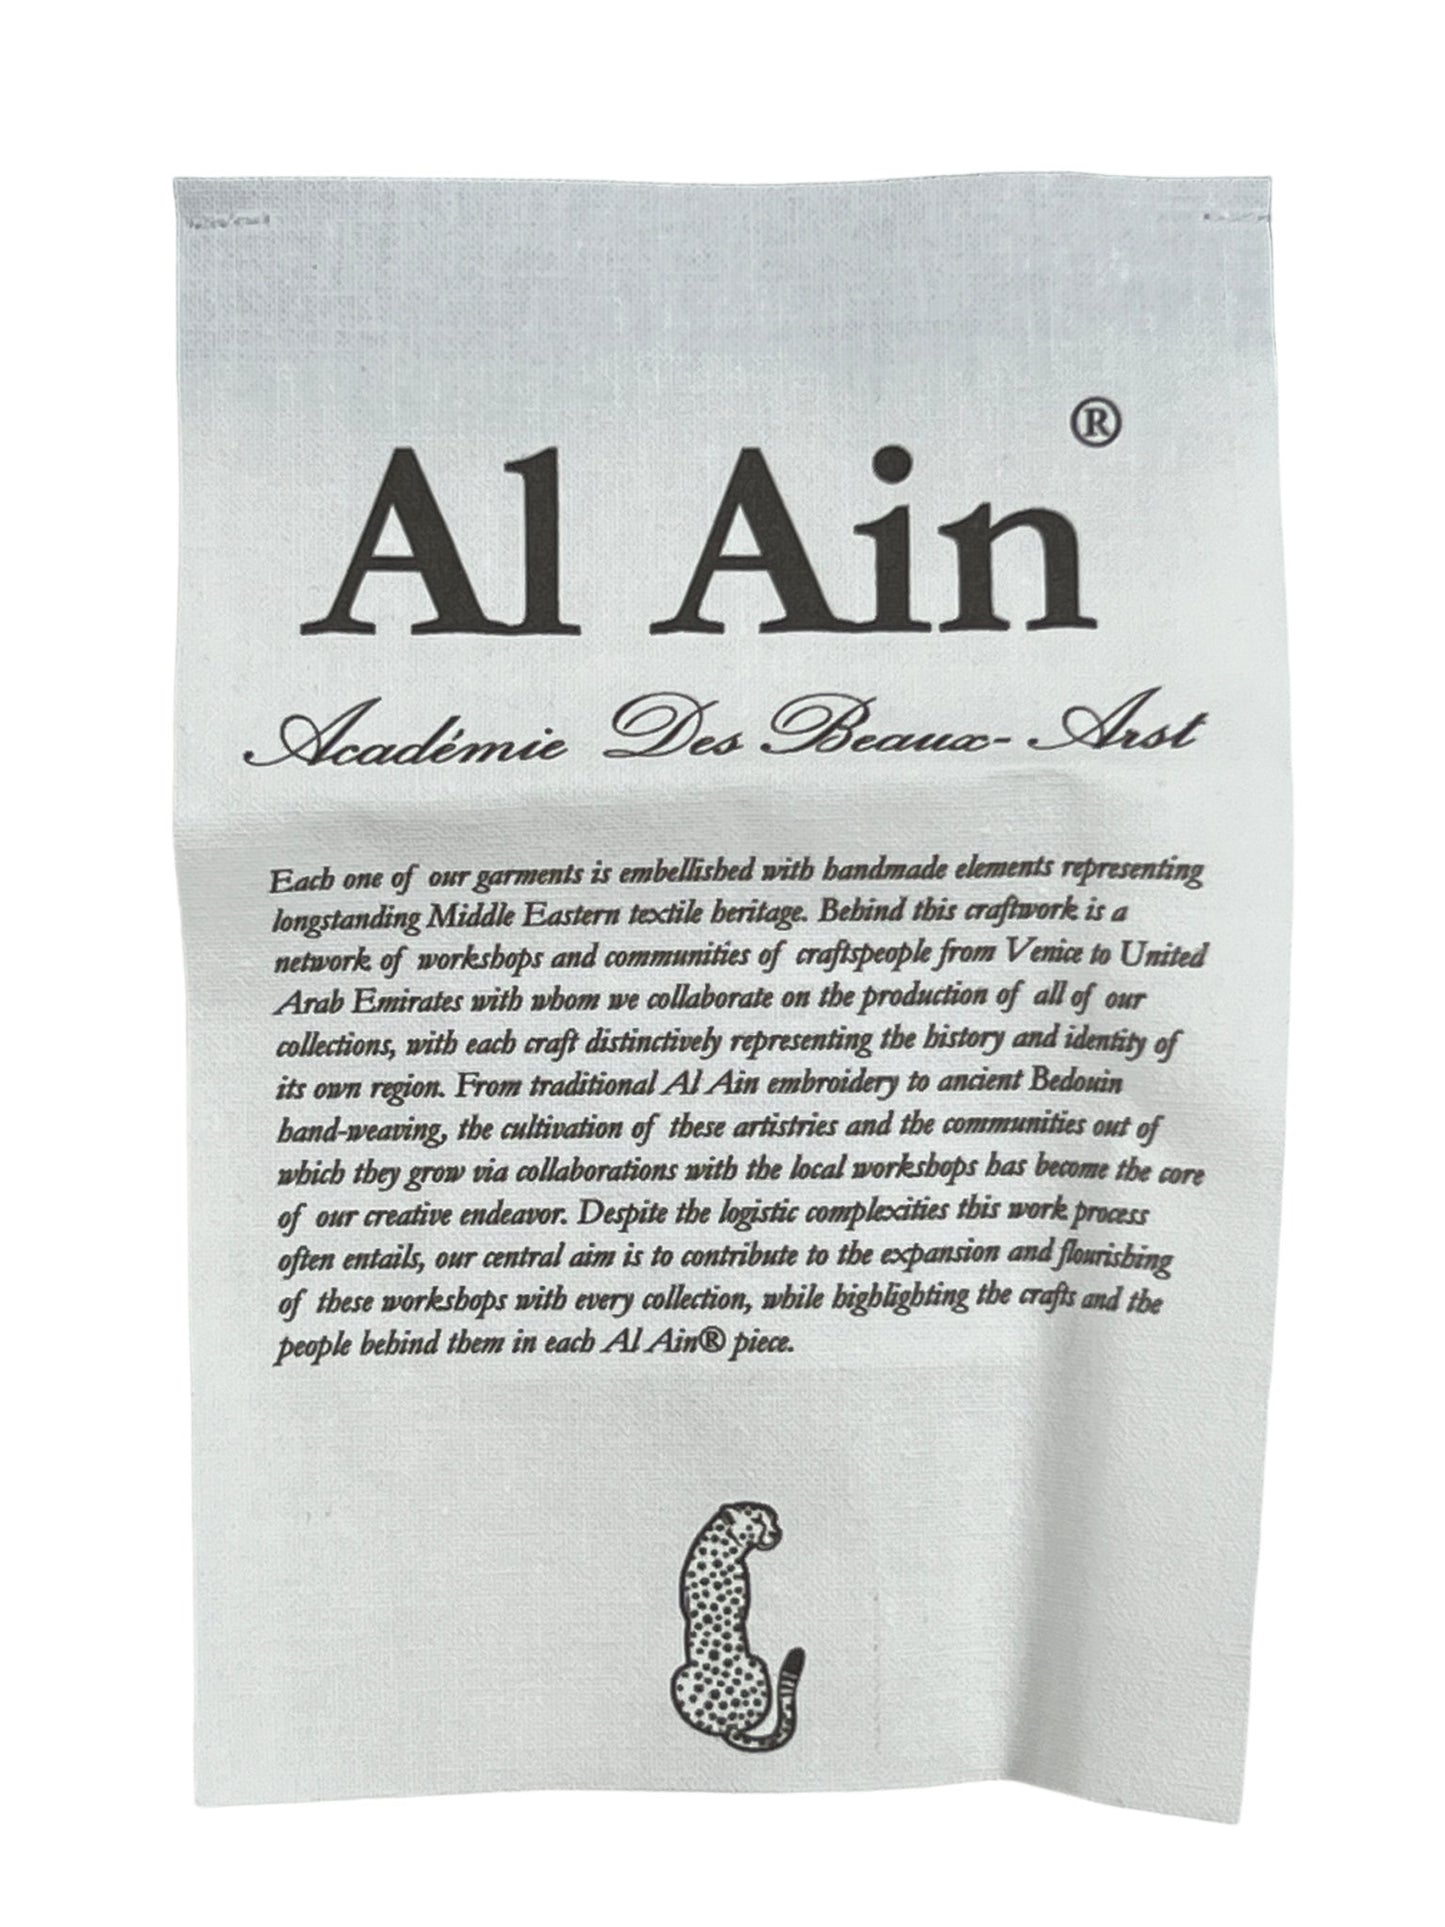 A fabric label for "AL AIN AHOX S102 PALMIER CHAMEAU" with elegant text and an academic emblem, describing the brand's commitment to beauty and artisanship in the creation of their streetwear look products.